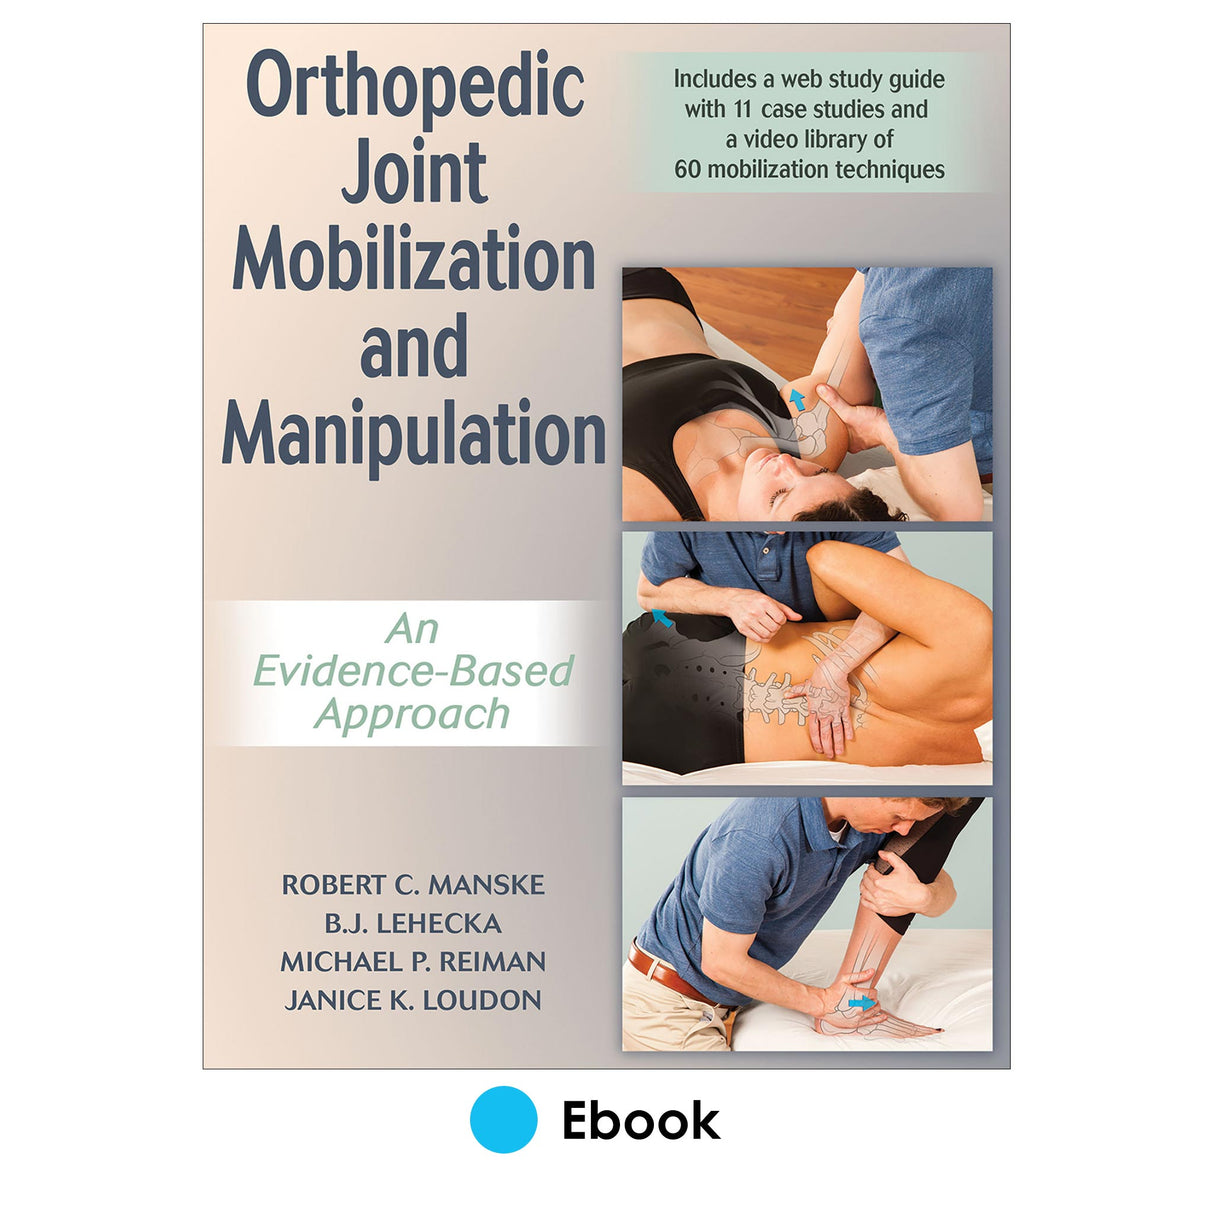 Orthopedic Joint Mobilization and Manipulation Enhanced epub With Web Study Guide